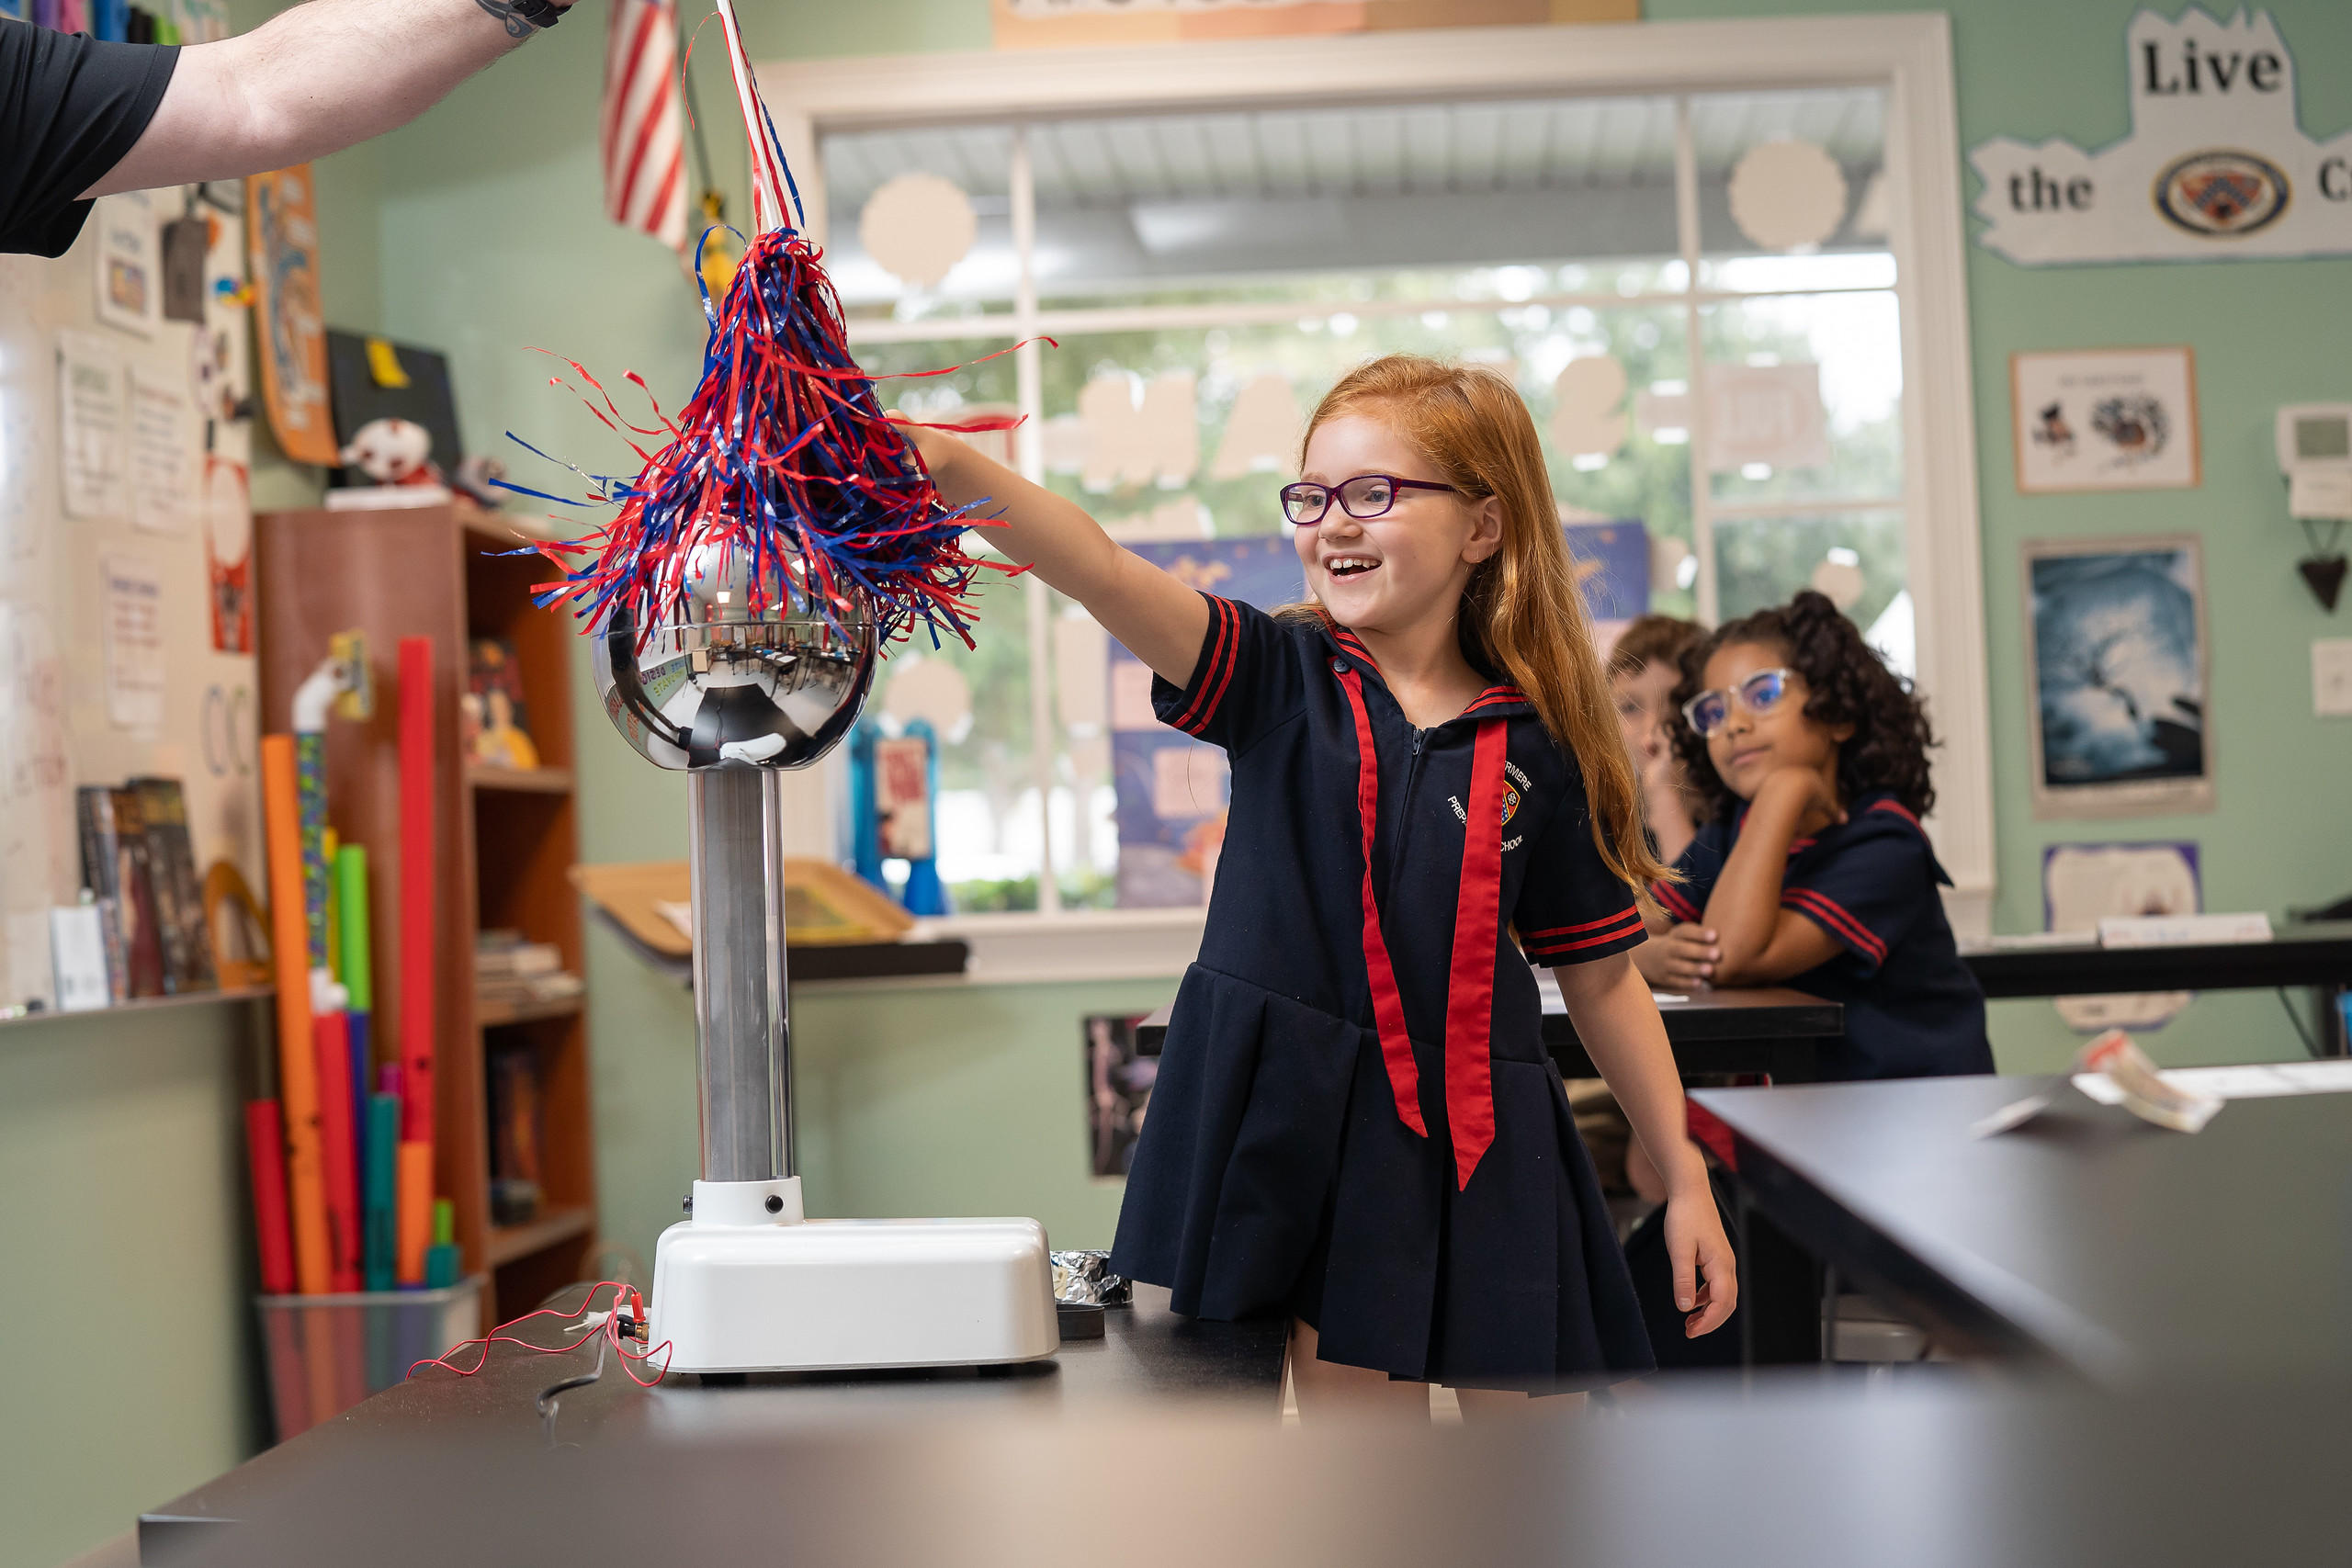 The Lower School emphasizes hands-on experiences in a fun, stimulating environment that is both challenging and supportive.